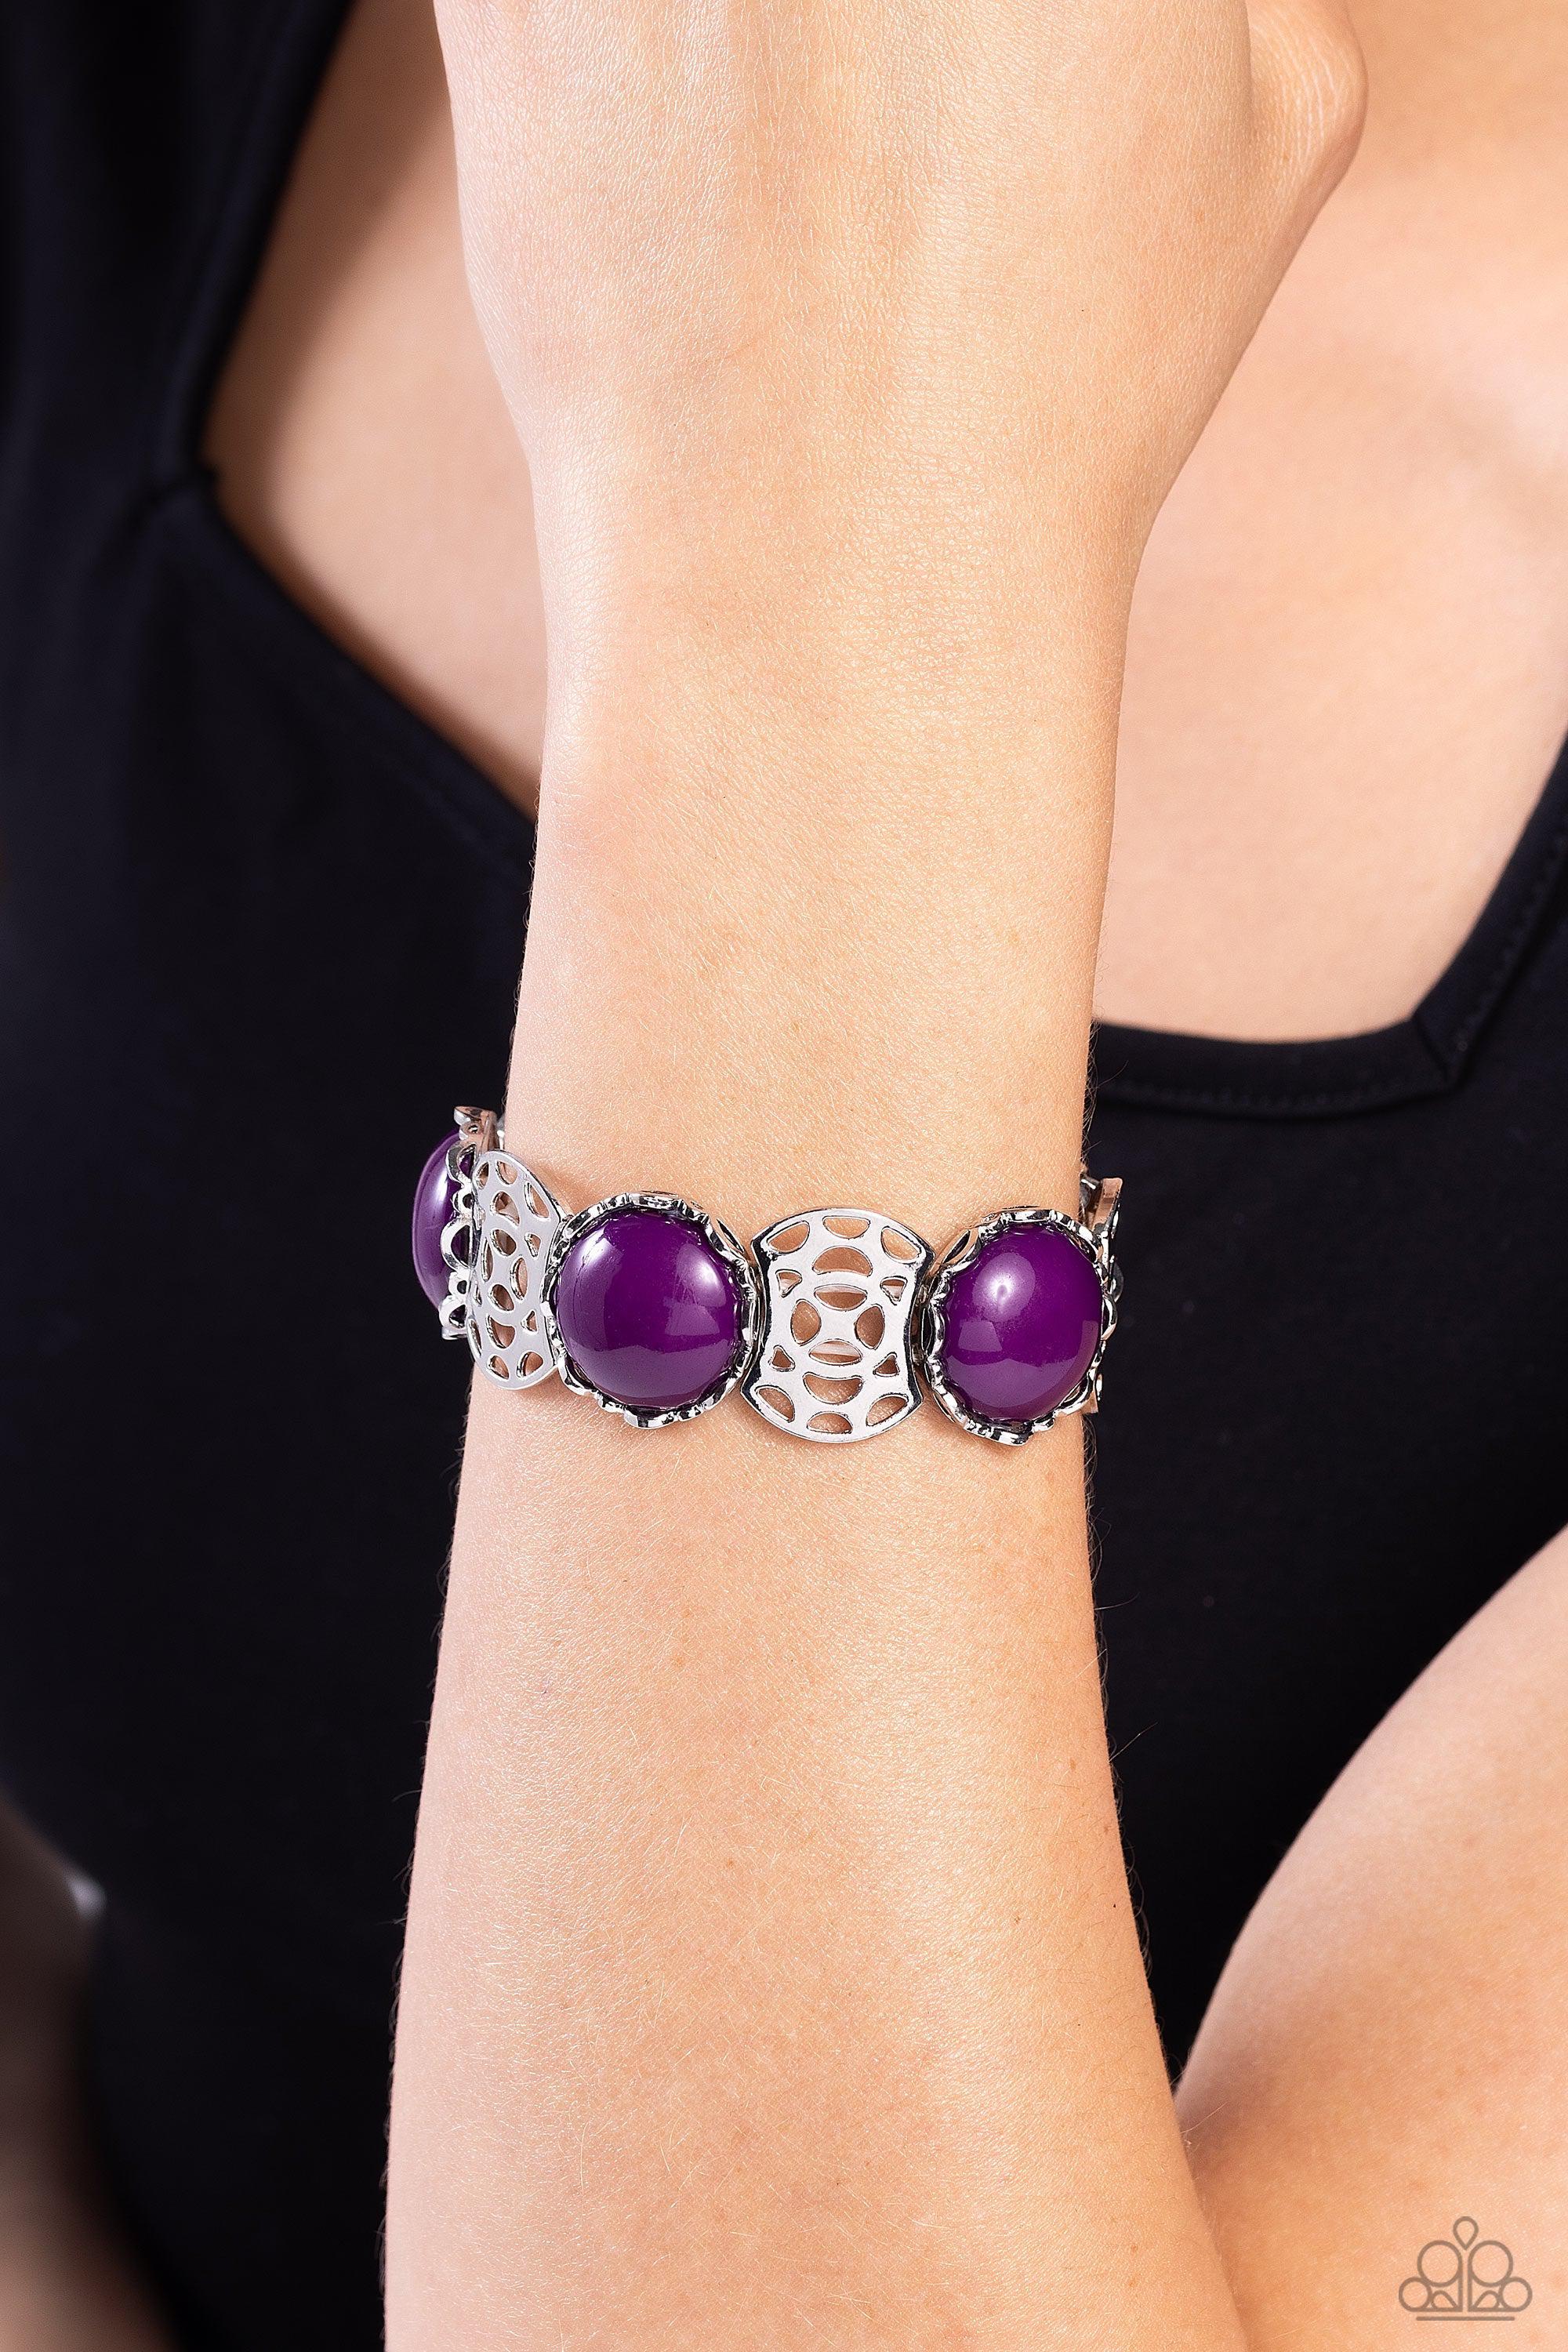 Ethereal Excursion Purple Bracelet - Paparazzi Accessories- lightbox - CarasShop.com - $5 Jewelry by Cara Jewels